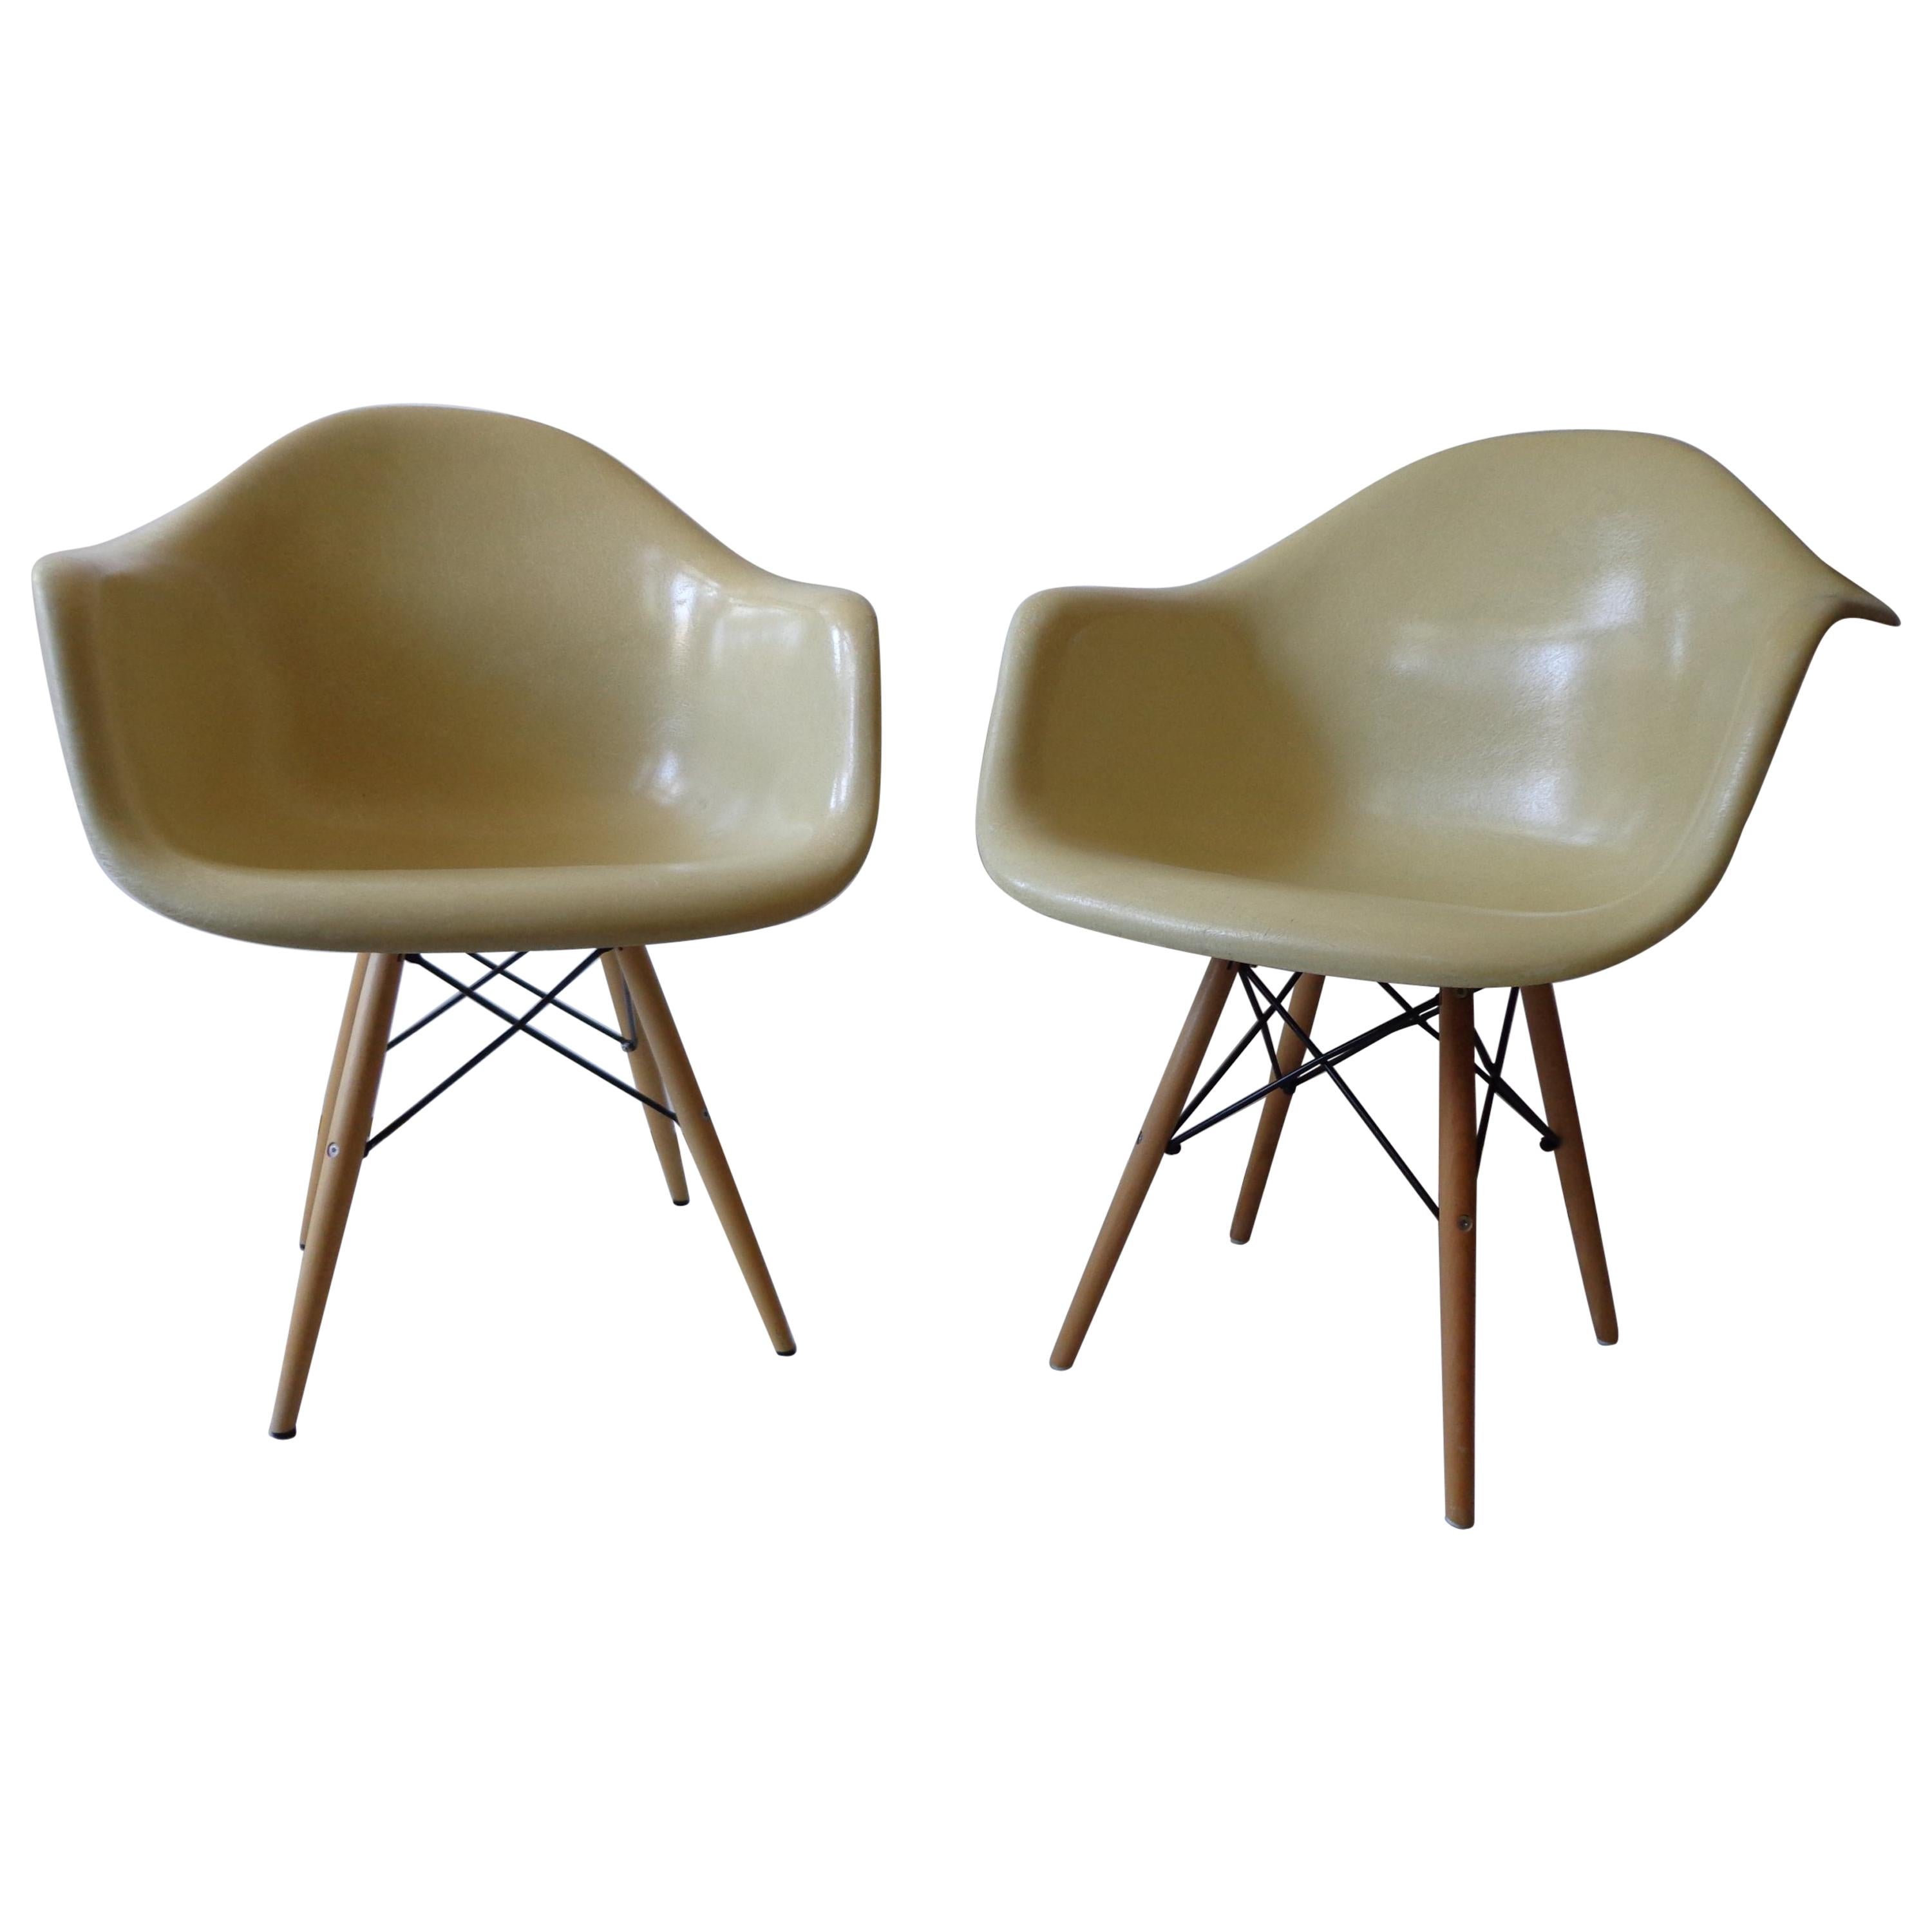 Mid-Century Modern Charles Eames Herman Miller Fiberglass Dining Chairs, 1960s For Sale